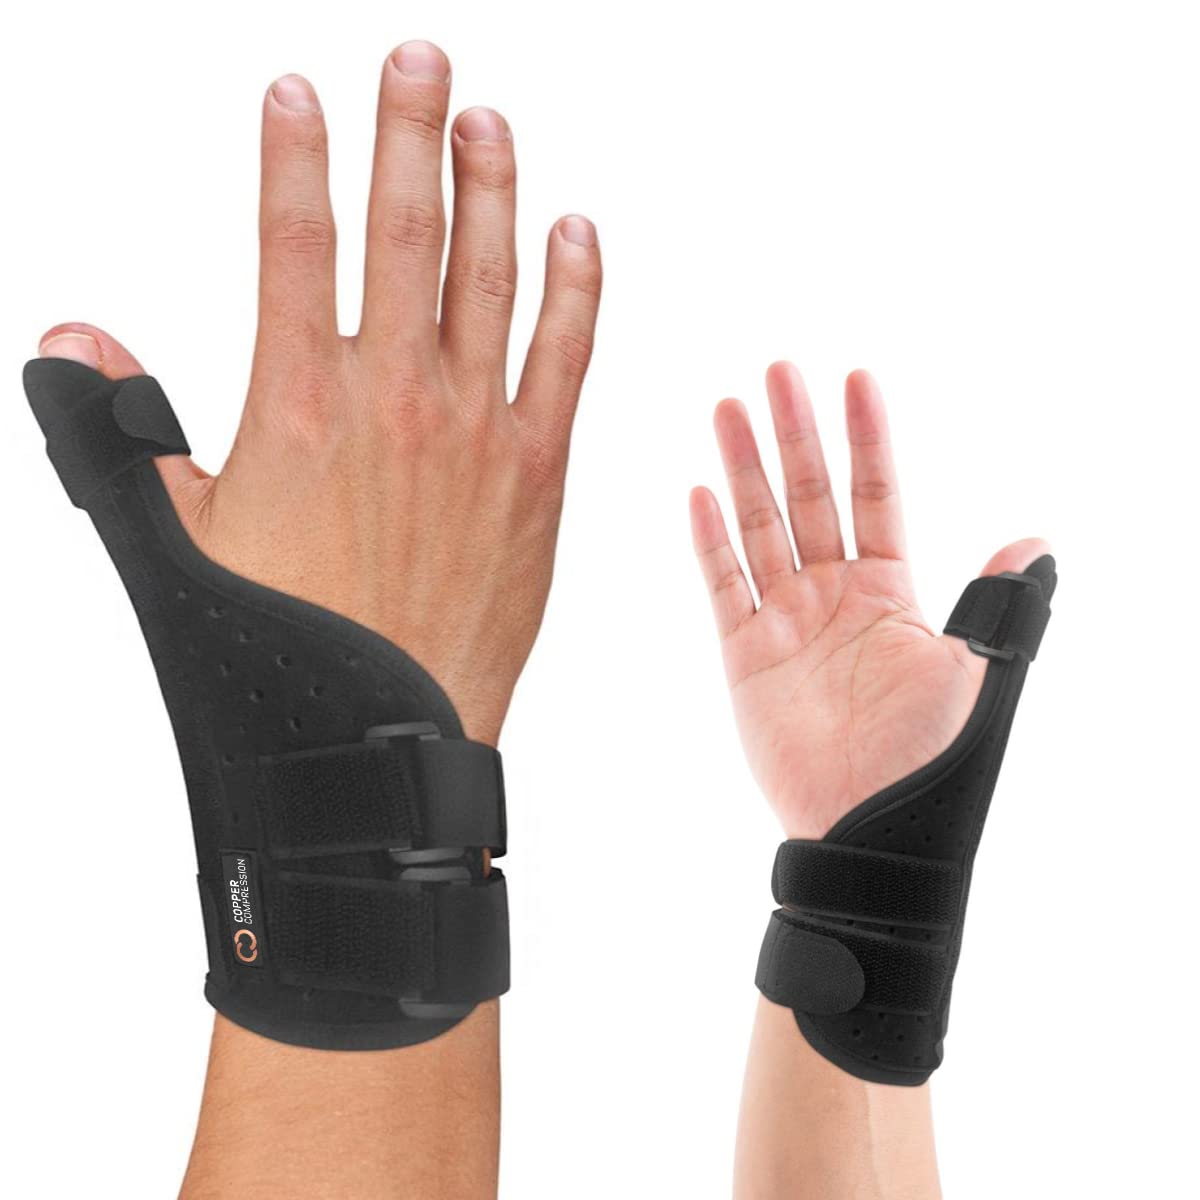 Copper Compression Long Thumb Brace - Copper Infused Thumb Spica Splint for  Arthritis, Tendonitis. For Both Right Hand and Left Hand. Wrist, Hands, and  Thumb Stabilizer and Immobilizer One Size (Pack of 1)